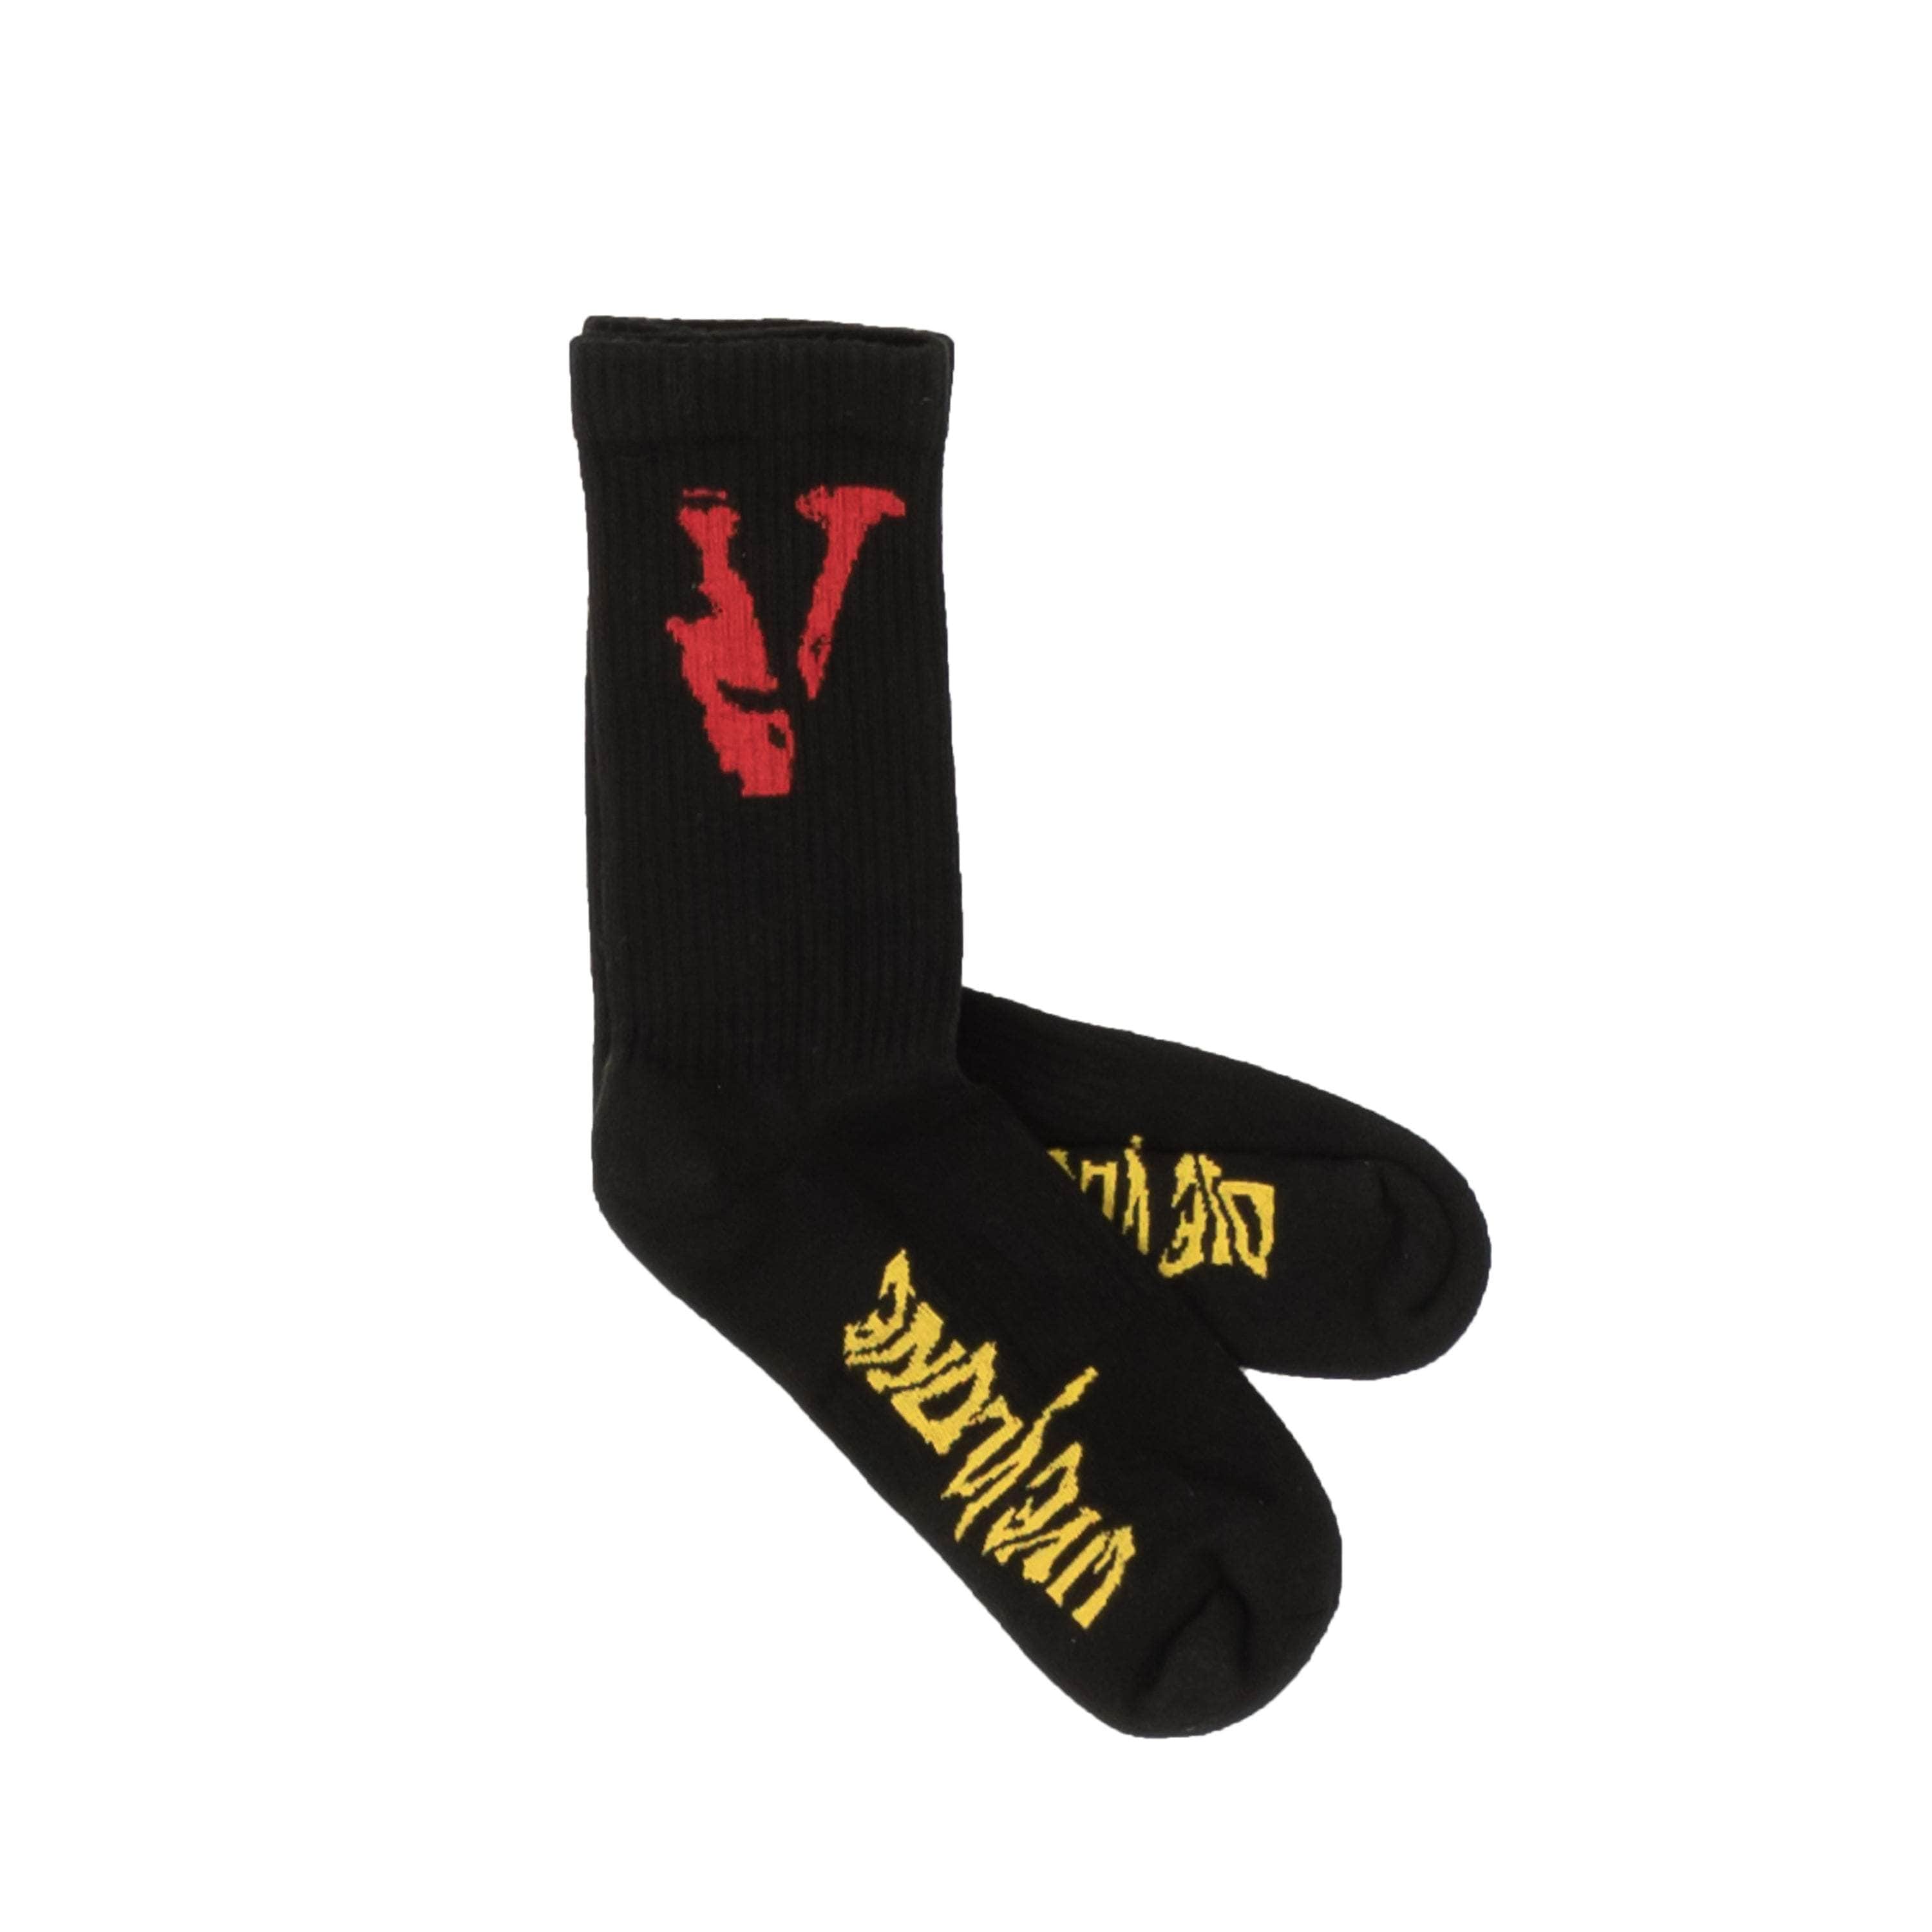 Vlone channelenable-all, chicmi, couponcollection, gender-mens, main-accessories, mens-shoes, mens-socks, size-os, under-250, vlone OS Black, Red And Yellow Mirage Ribbed Socks VLN-XACC-0003/OS VLN-XACC-0003/OS